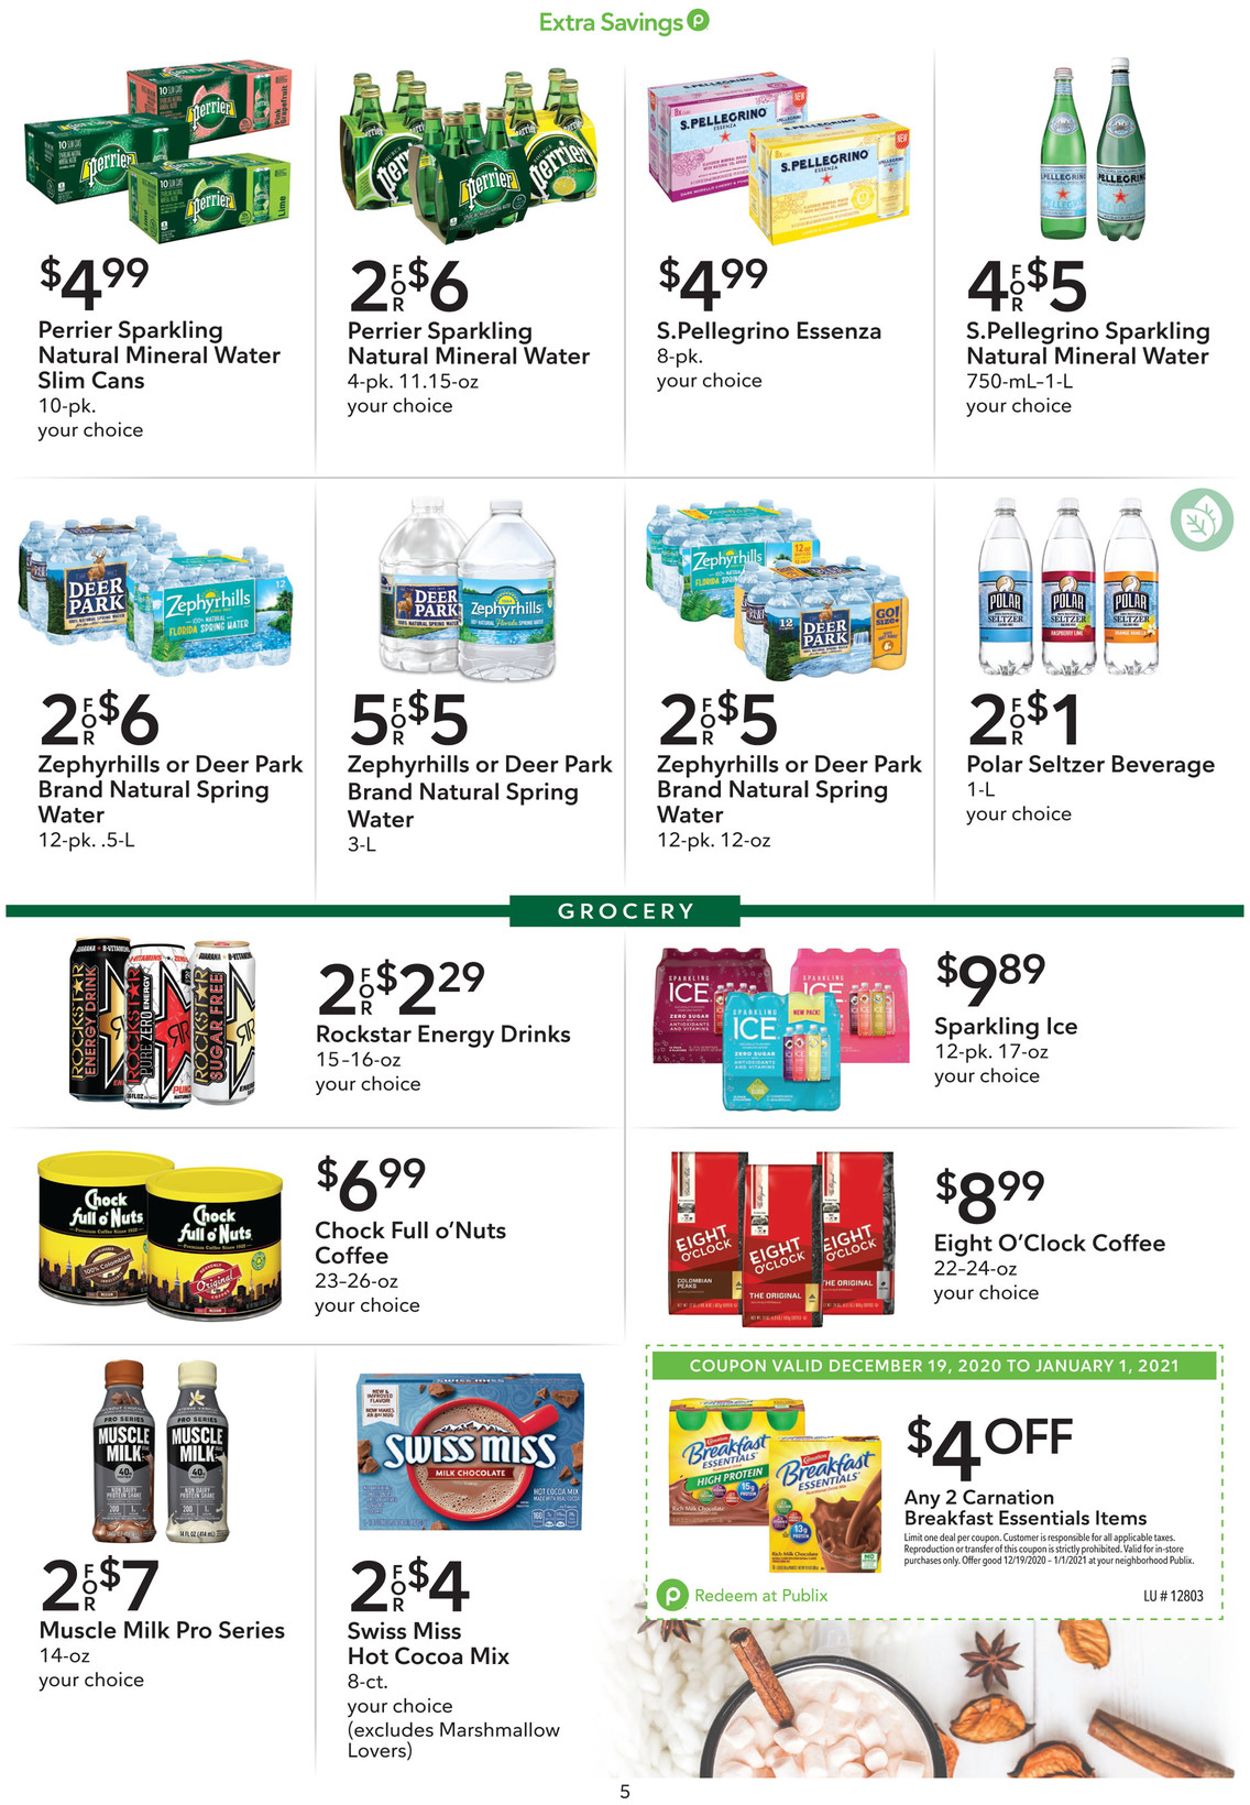 Catalogue Publix Extra Savings  from 12/19/2020